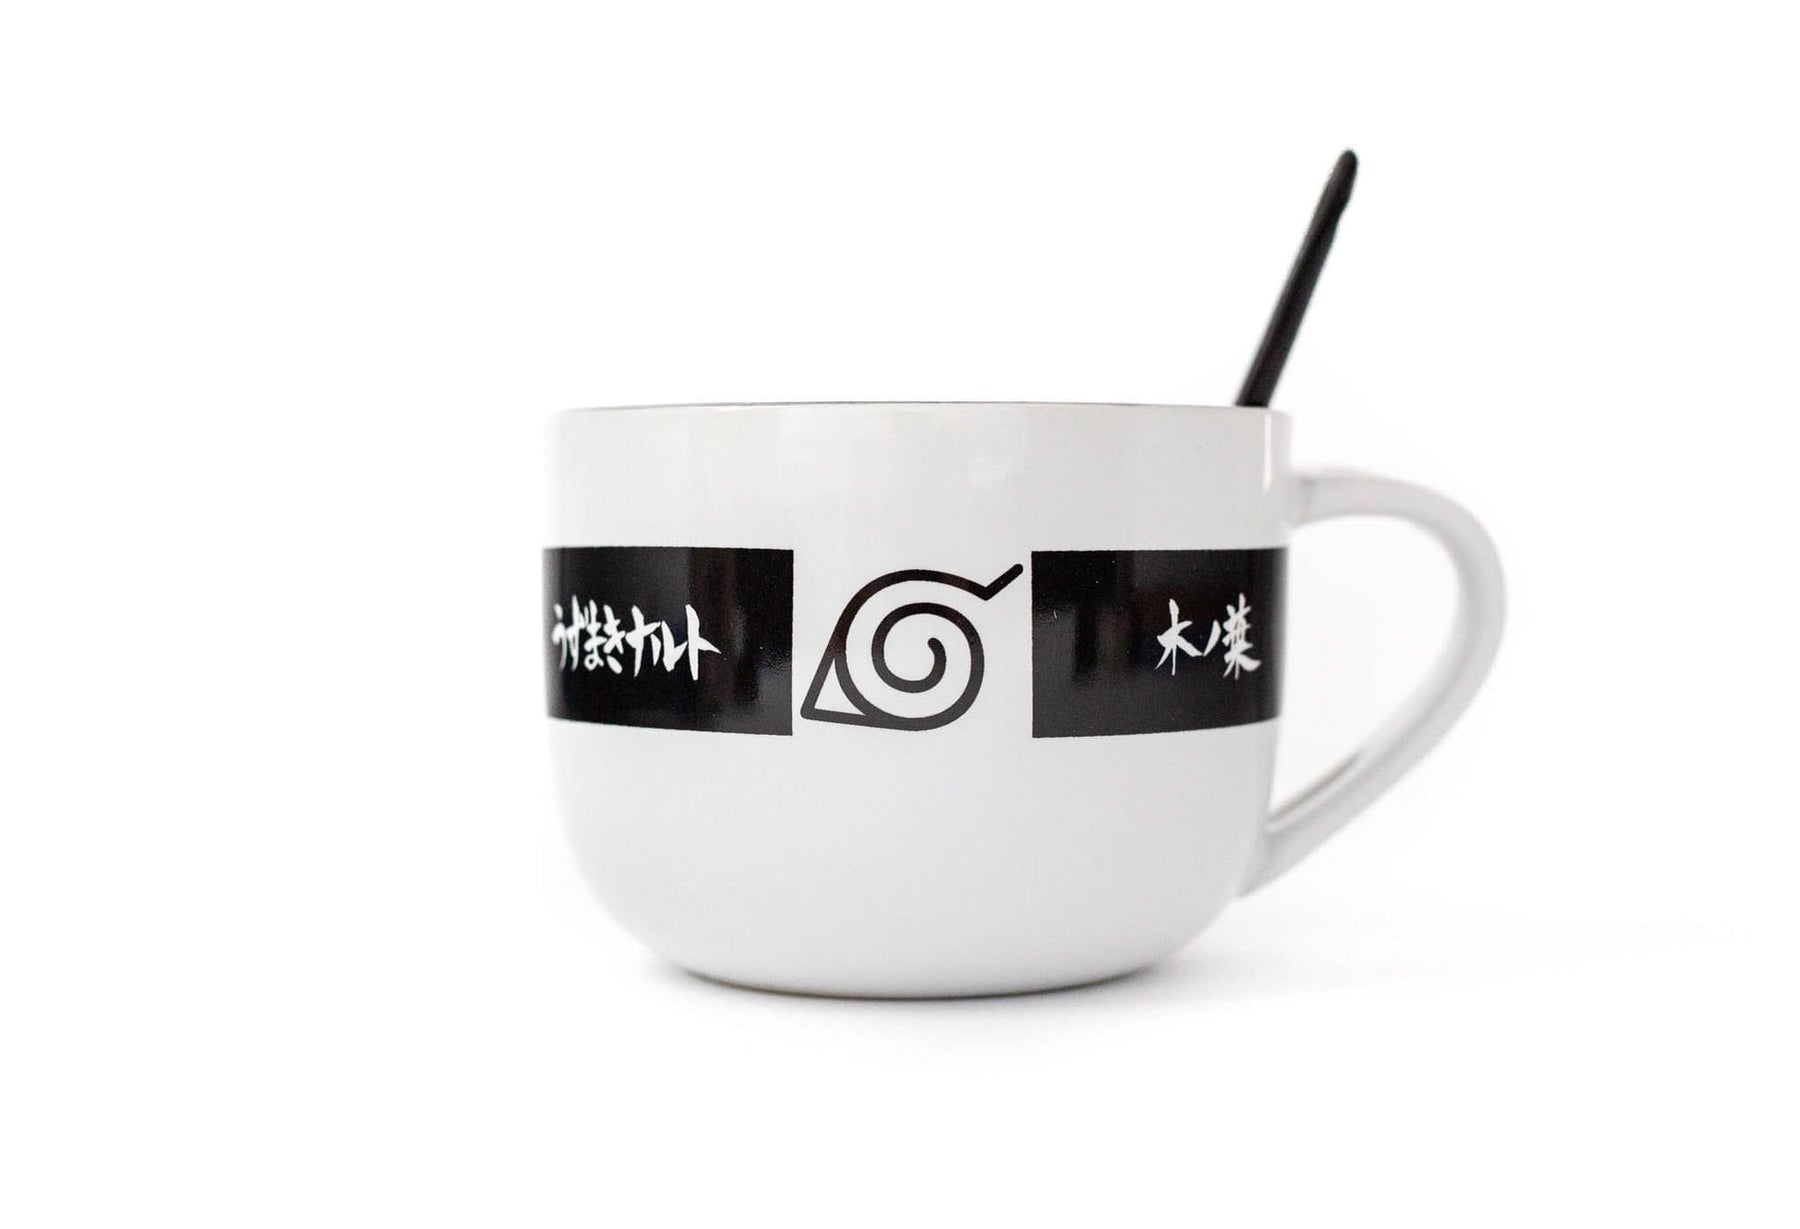 Naruto Anime Ceramic Ramen Soup Mug with Spoon - Awesome 20 oz Coffee Cup for Office